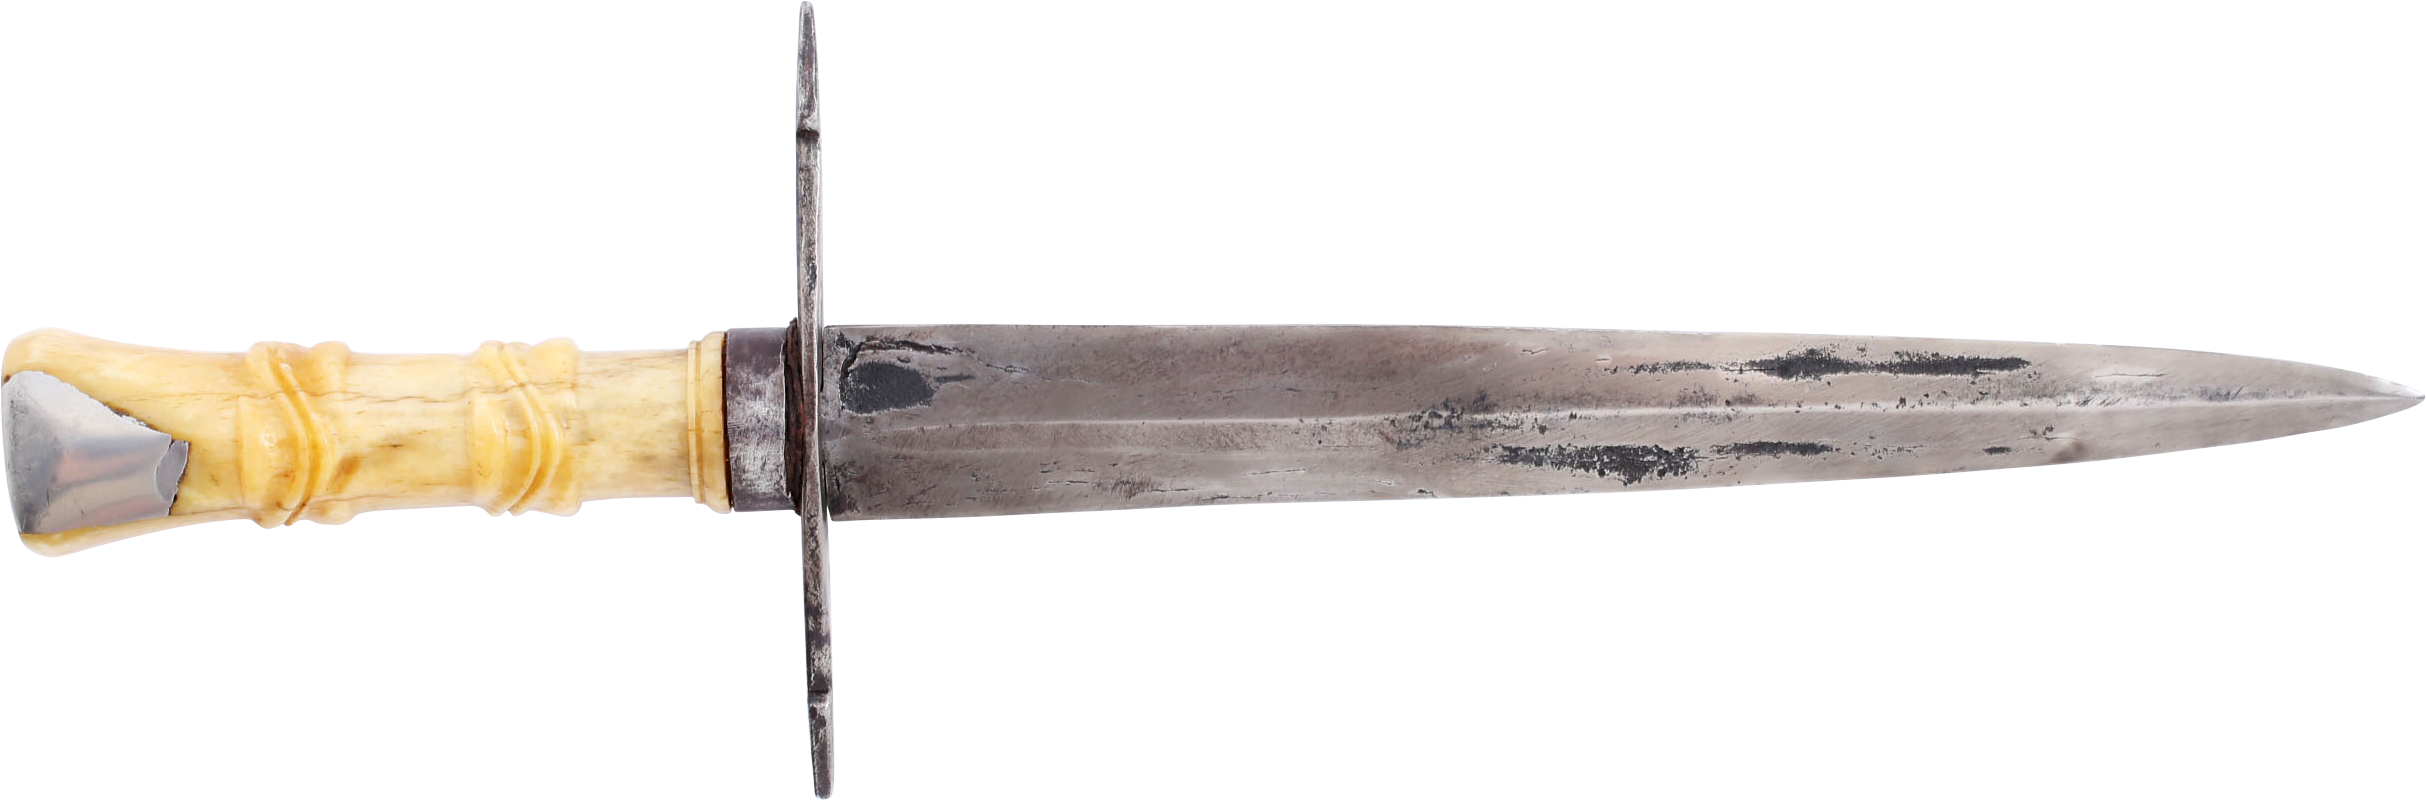 CONFEDERATE FIGHTING KNIFE, MID 19TH CENTURY